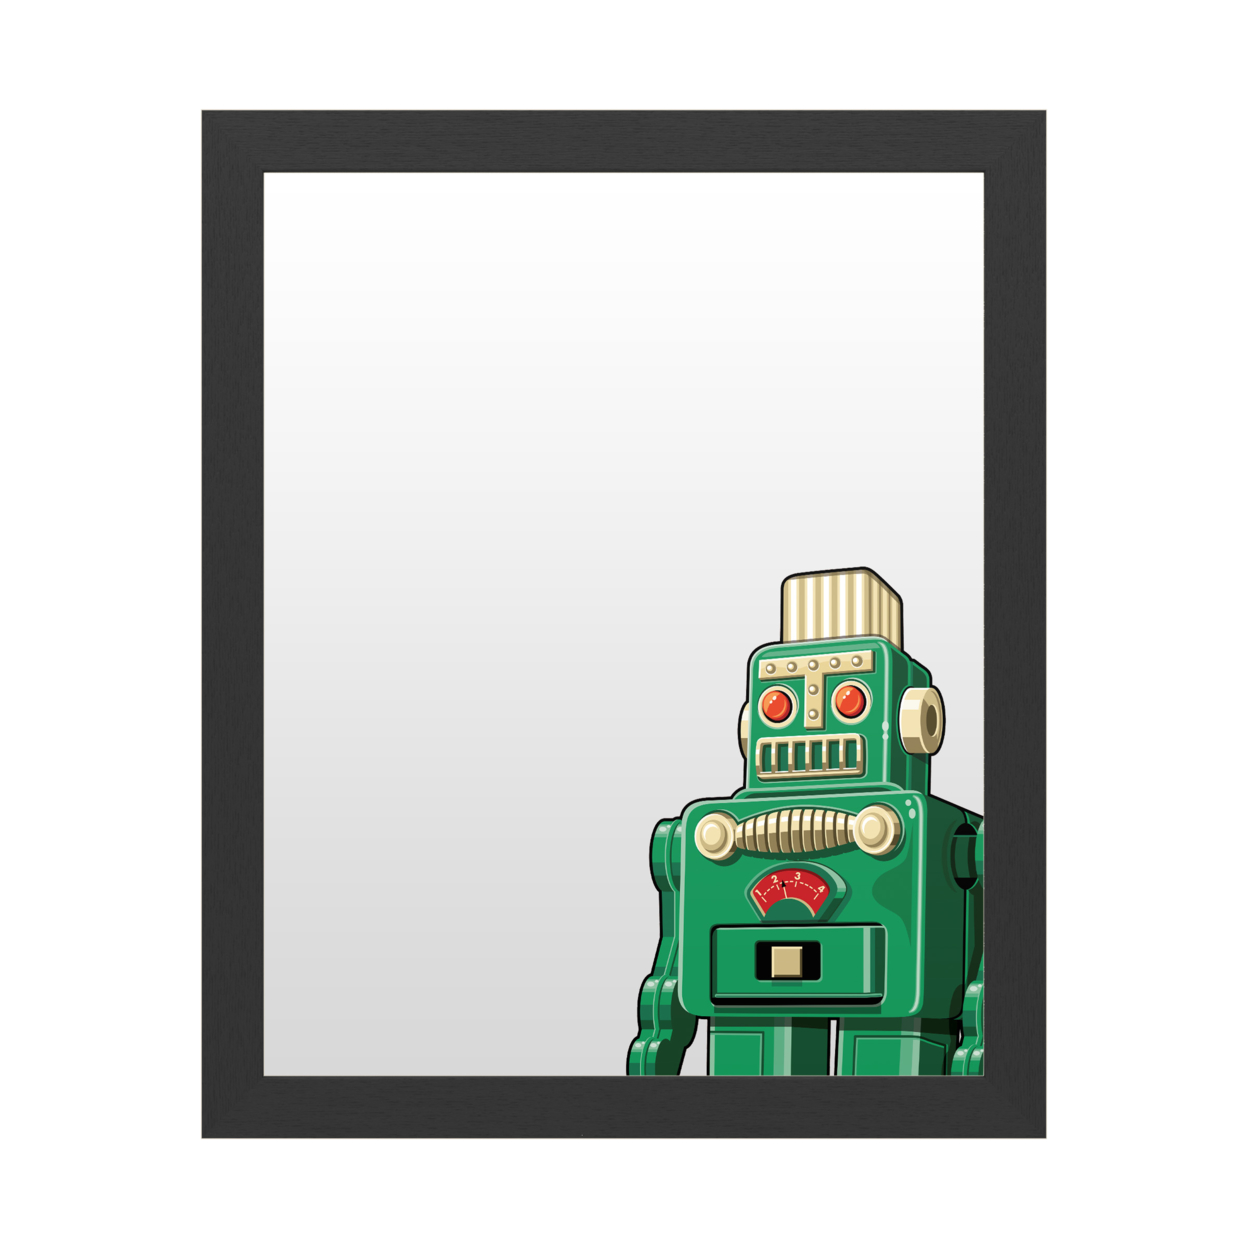 Dry Erase 16 X 20 Marker Board With Printed Artwork - Ron Magnes Vintage Green Robot White Board - Ready To Hang